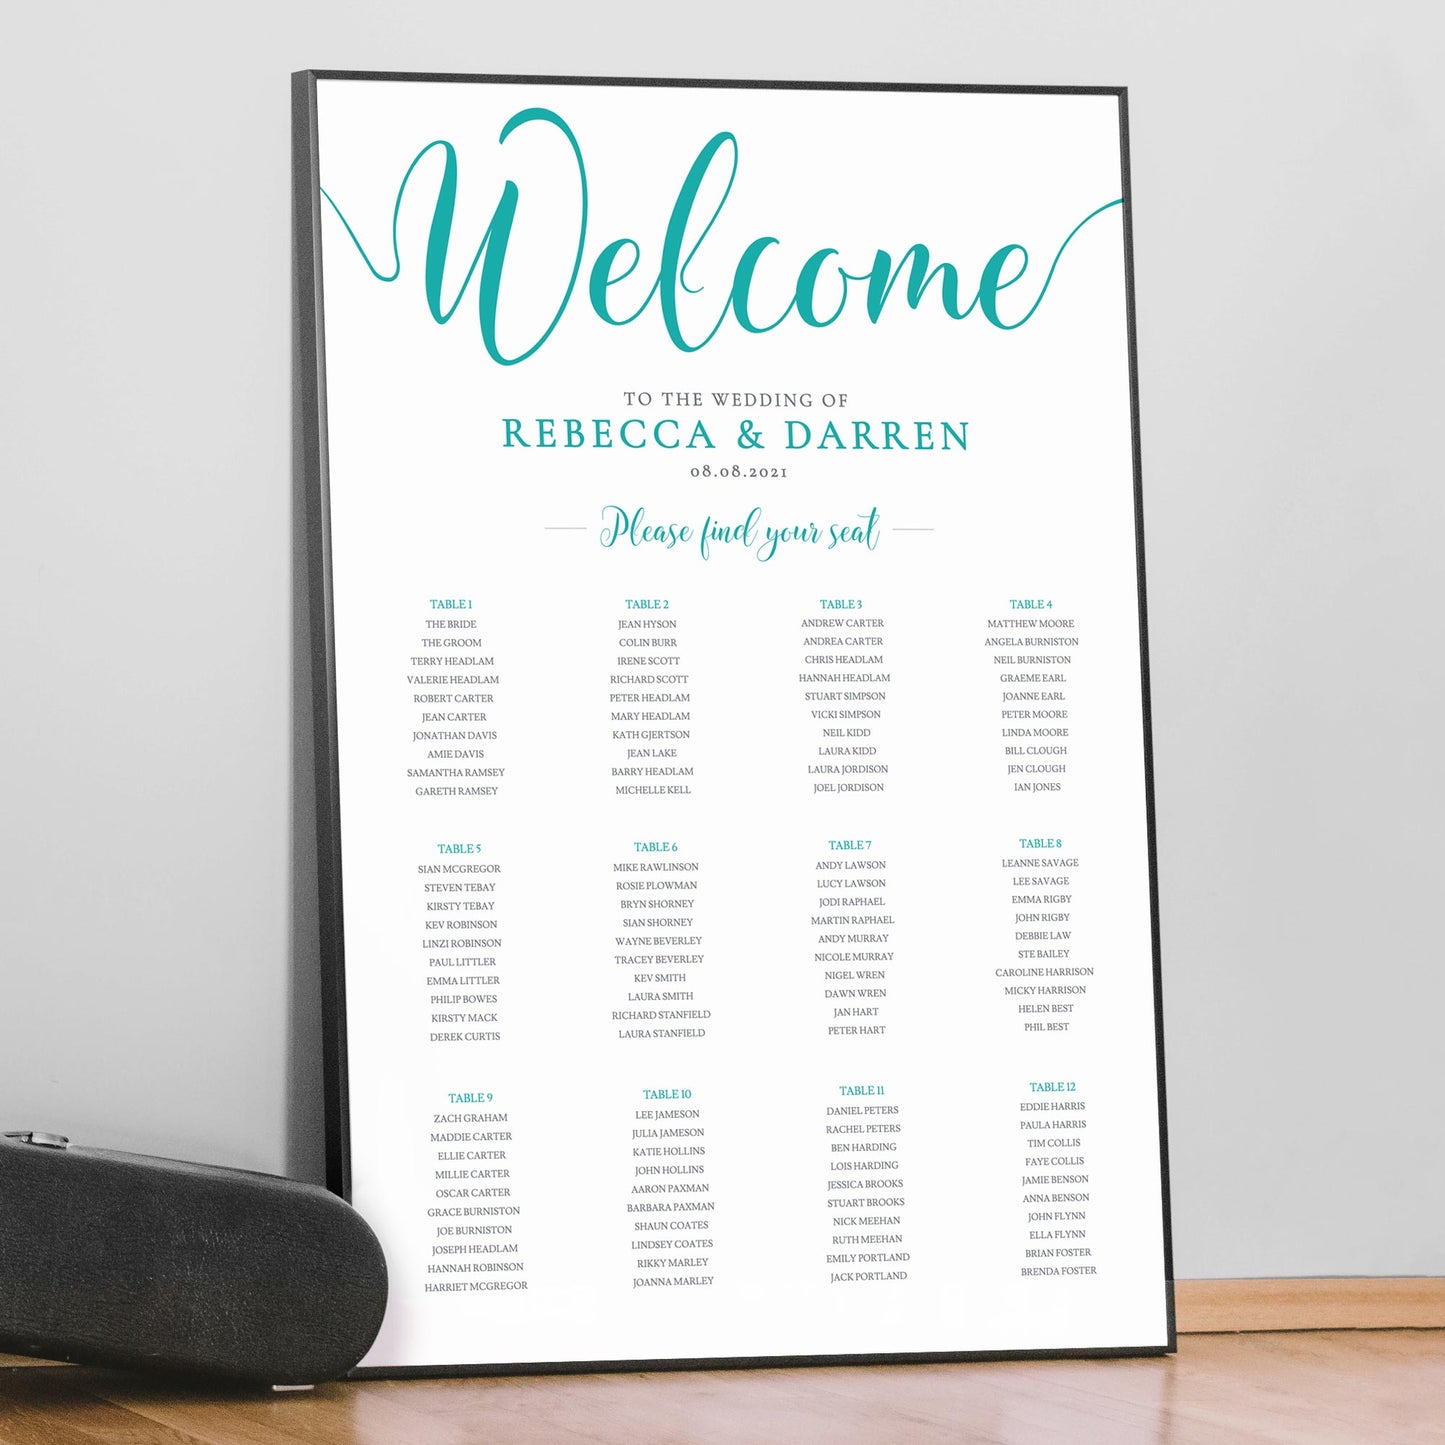 printed turquoise table plan in large frame